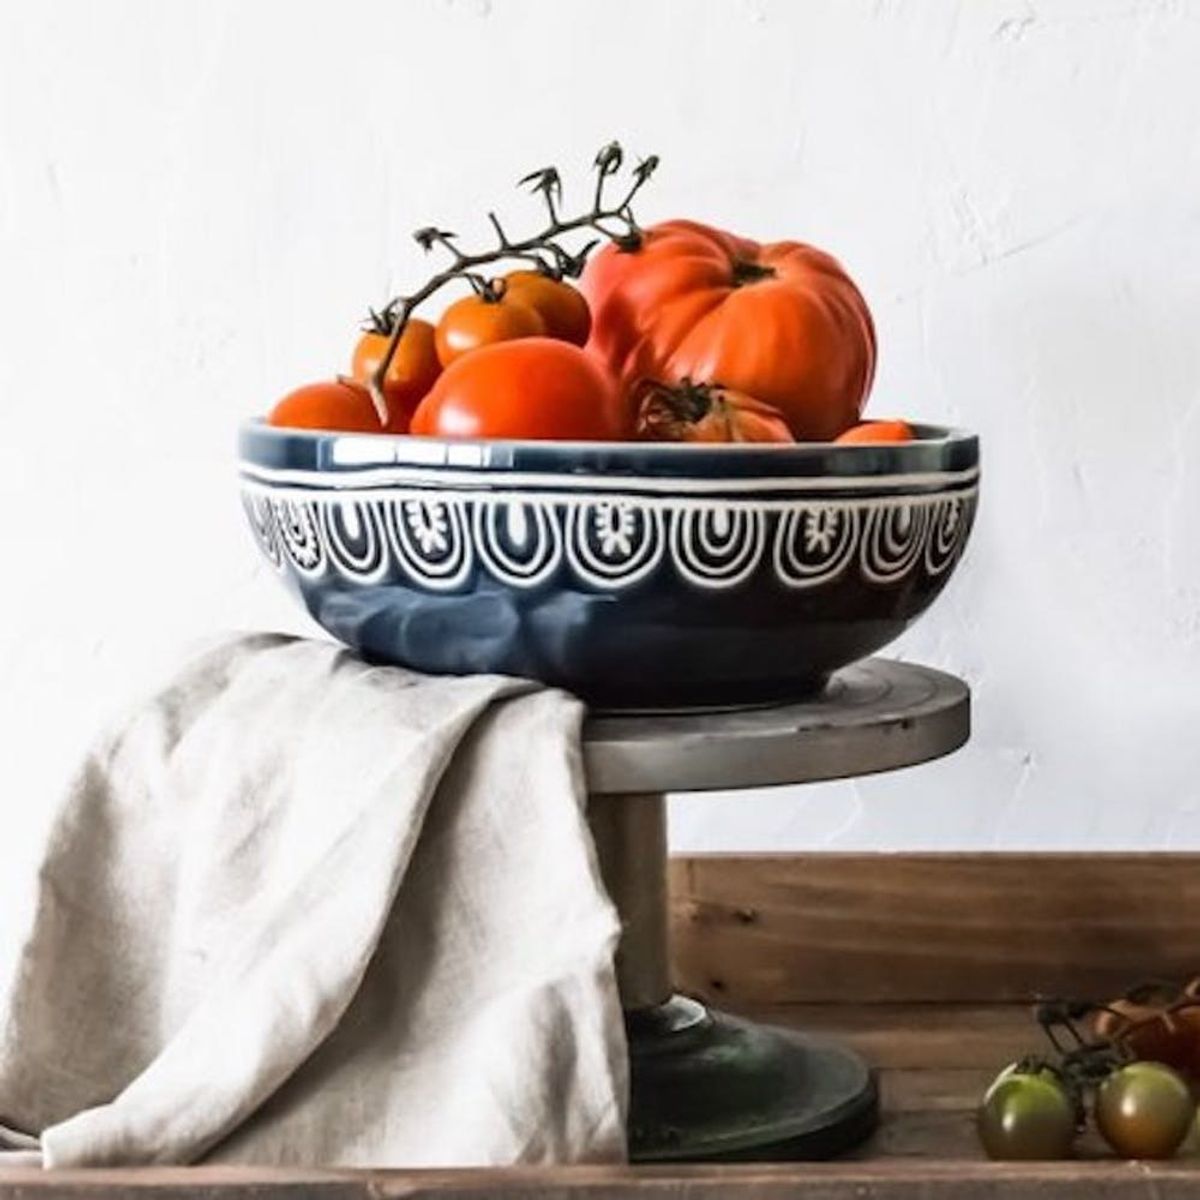 12 Gorgeous Accessories from Walmart to Upgrade Your Kitchen on a Budget